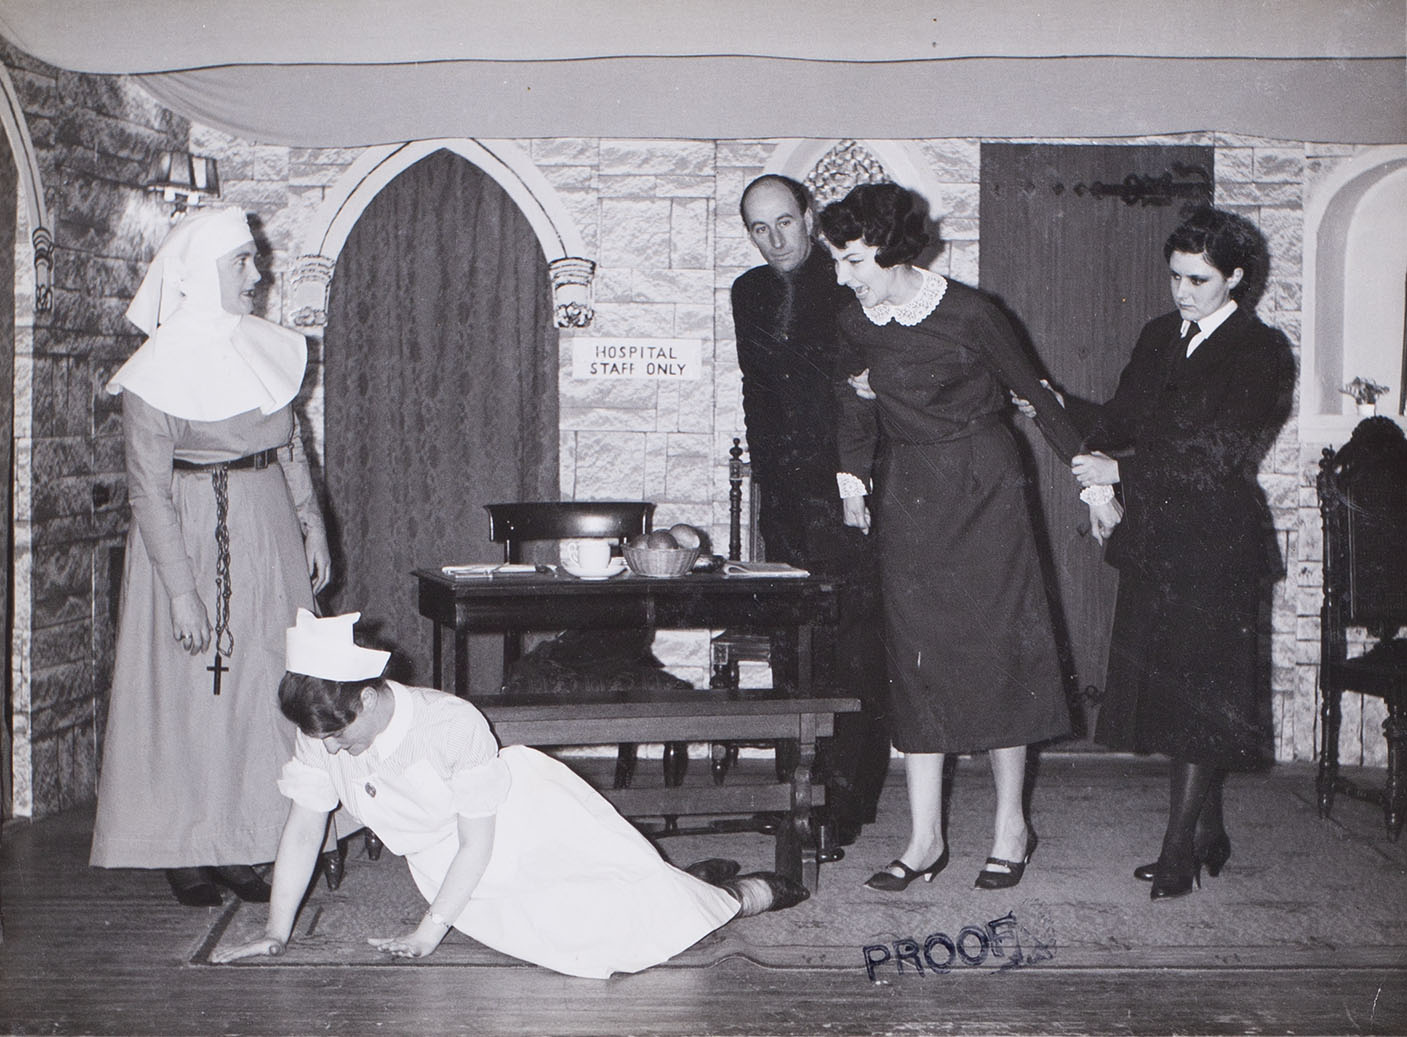 Photograph of the cast in a scene from the play 'Bonaventure' presented by Bishopsteignton Players